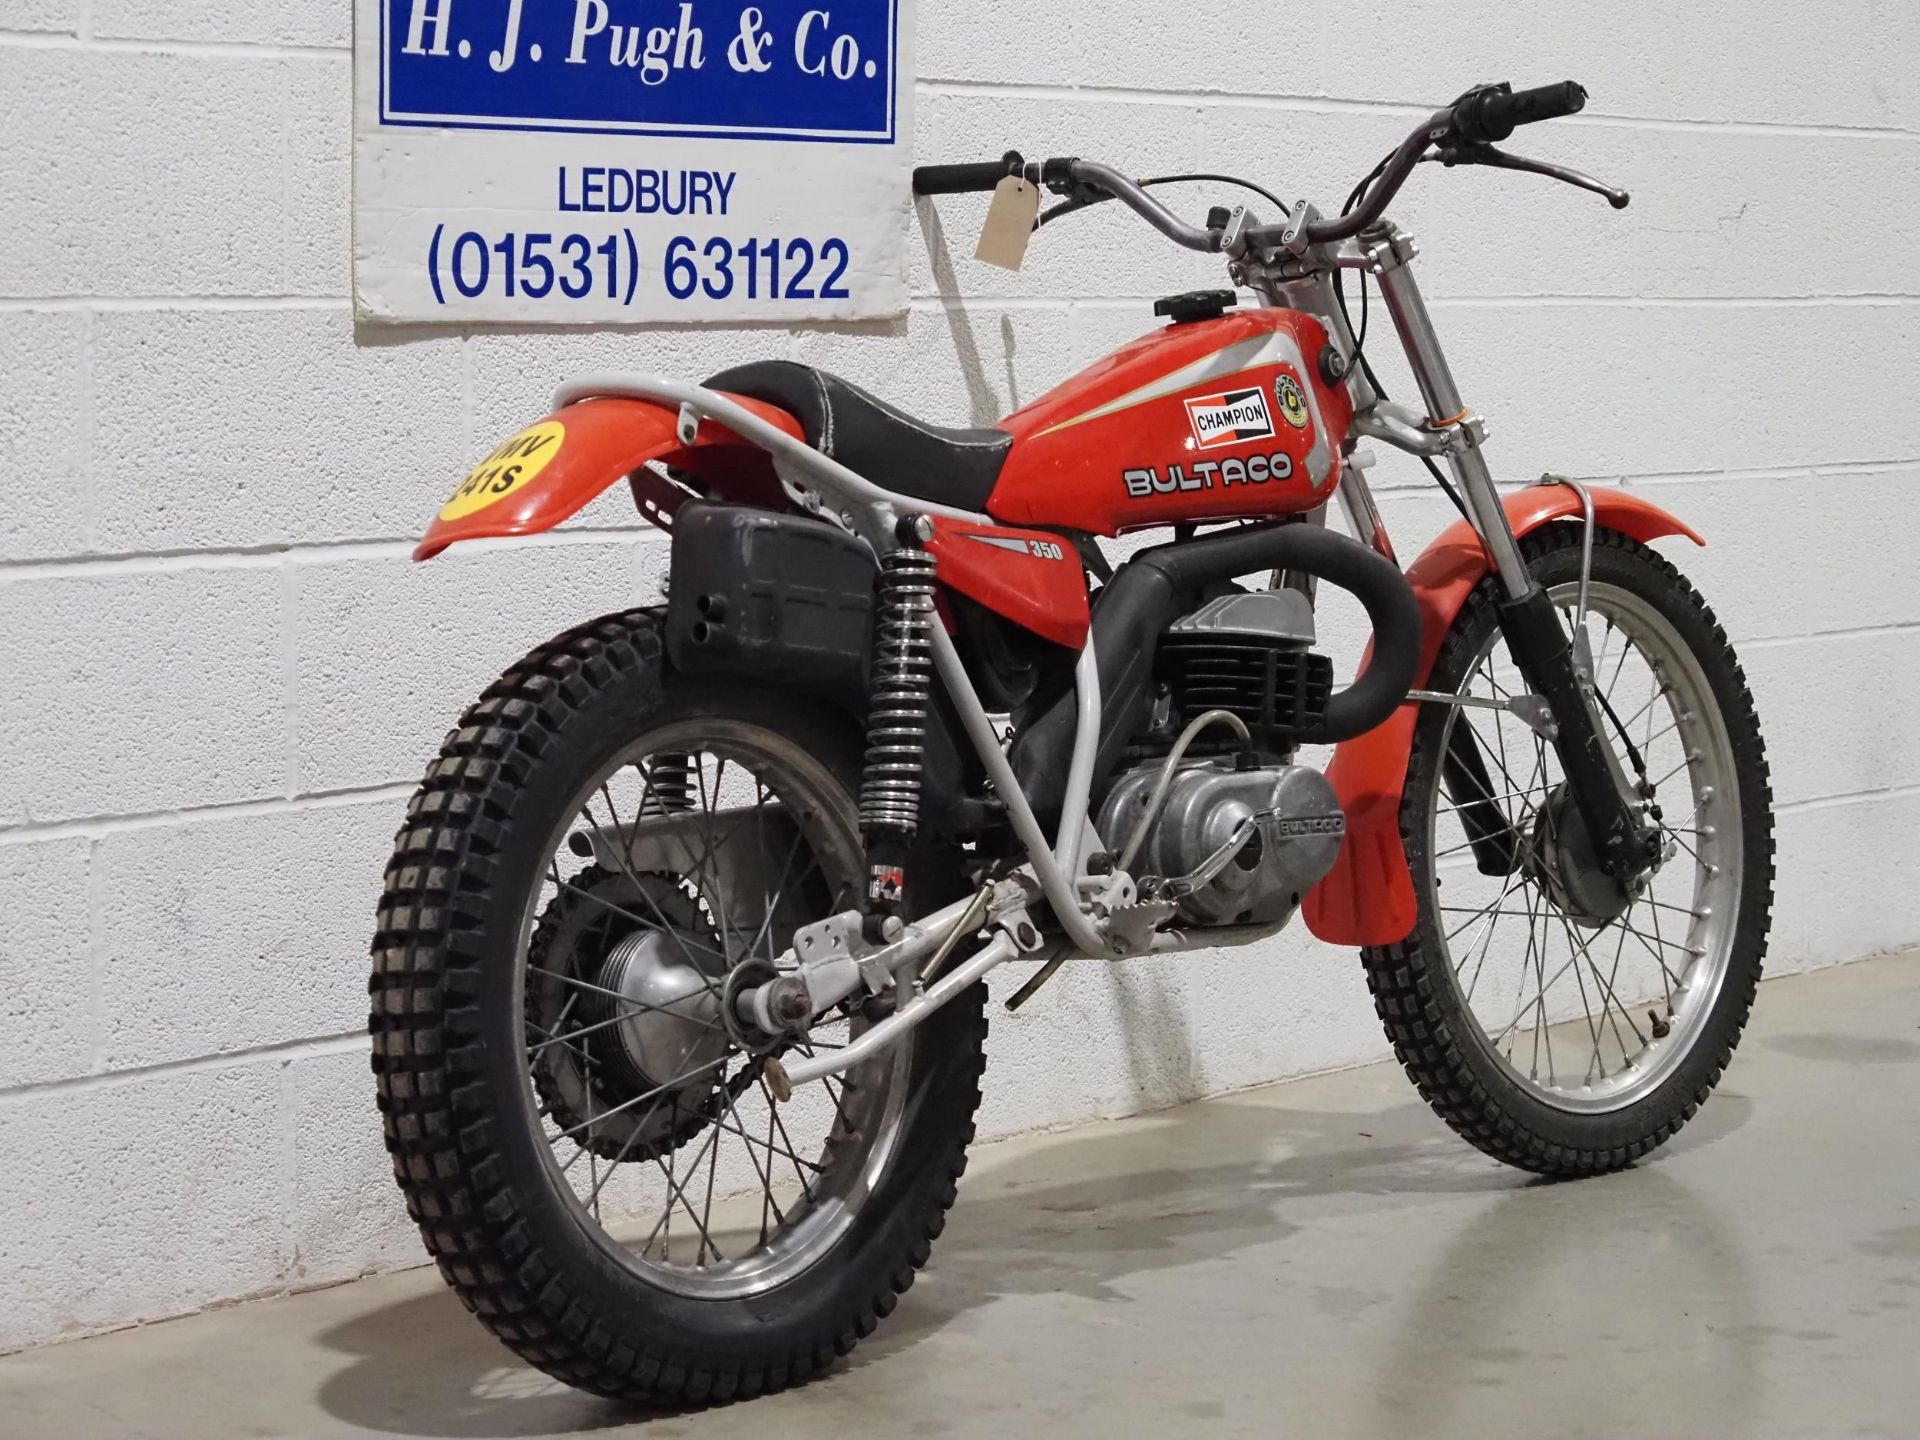 Bultaco 350 Sherpa T trials motorcycle. 1978. 325cc. Frame No. 19902443. V5 states 19902445 Engine - Image 3 of 5